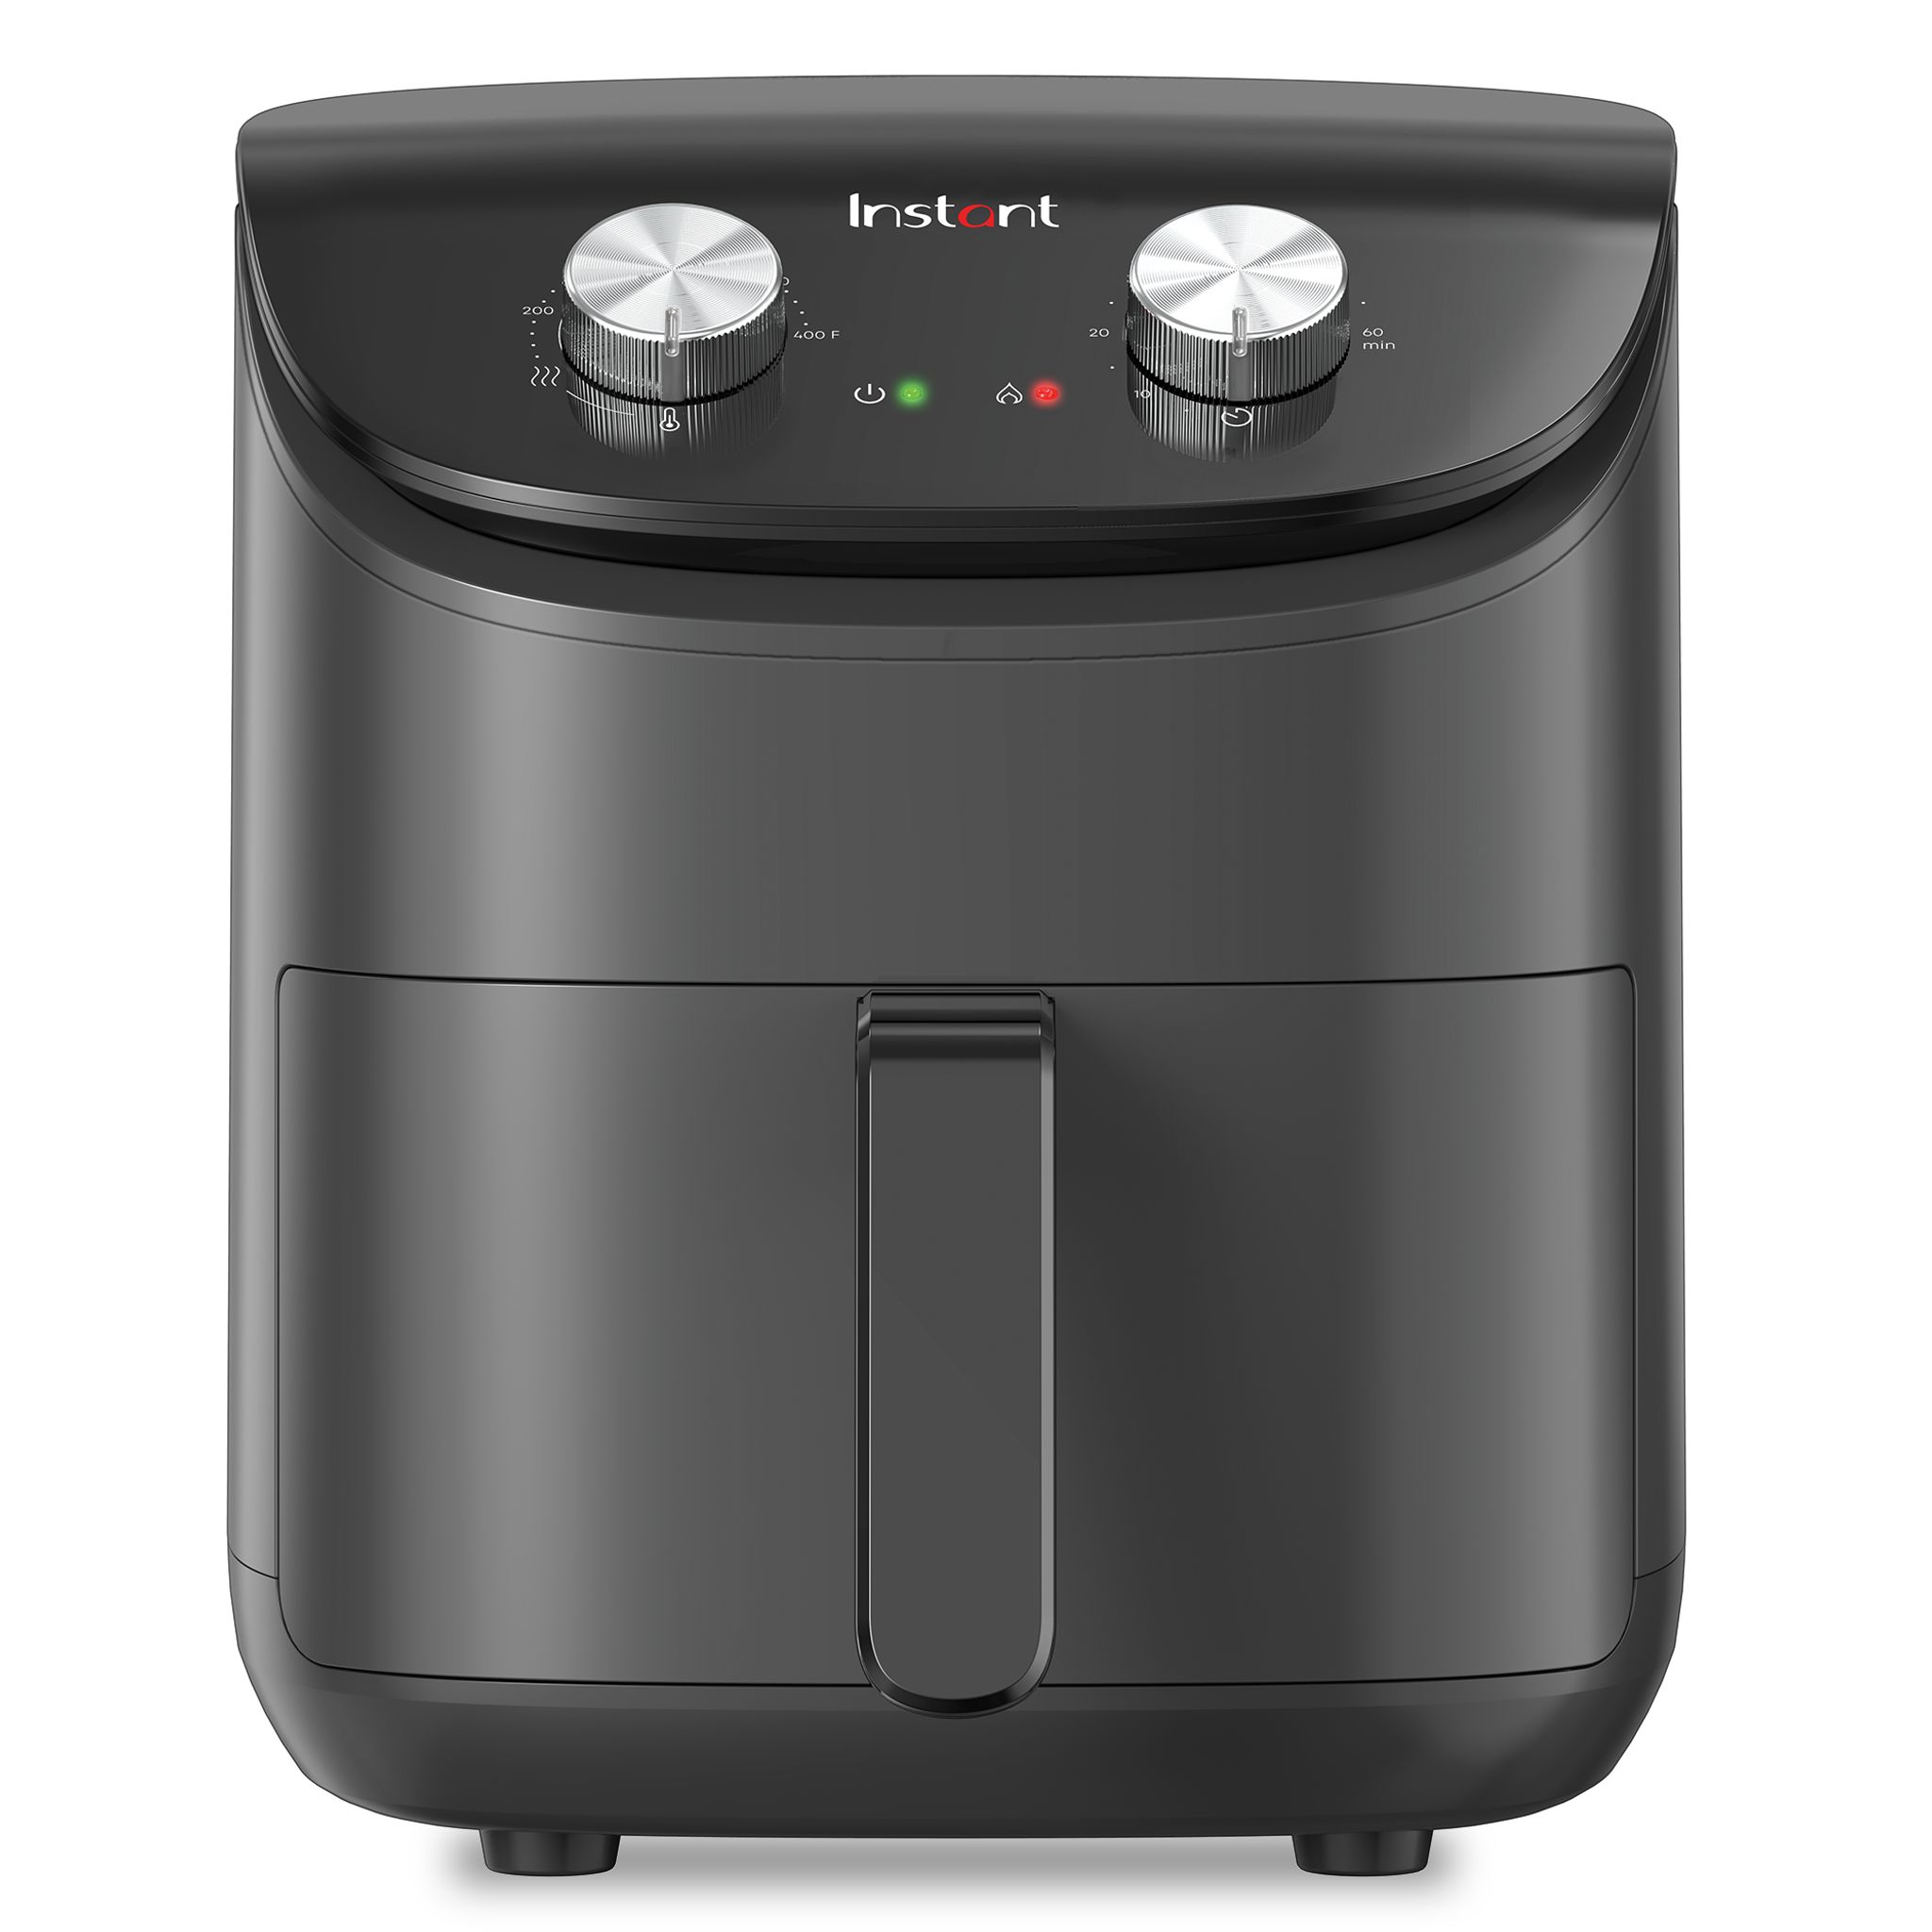 Cook's Essentials Air Fryer Accessory Kit 